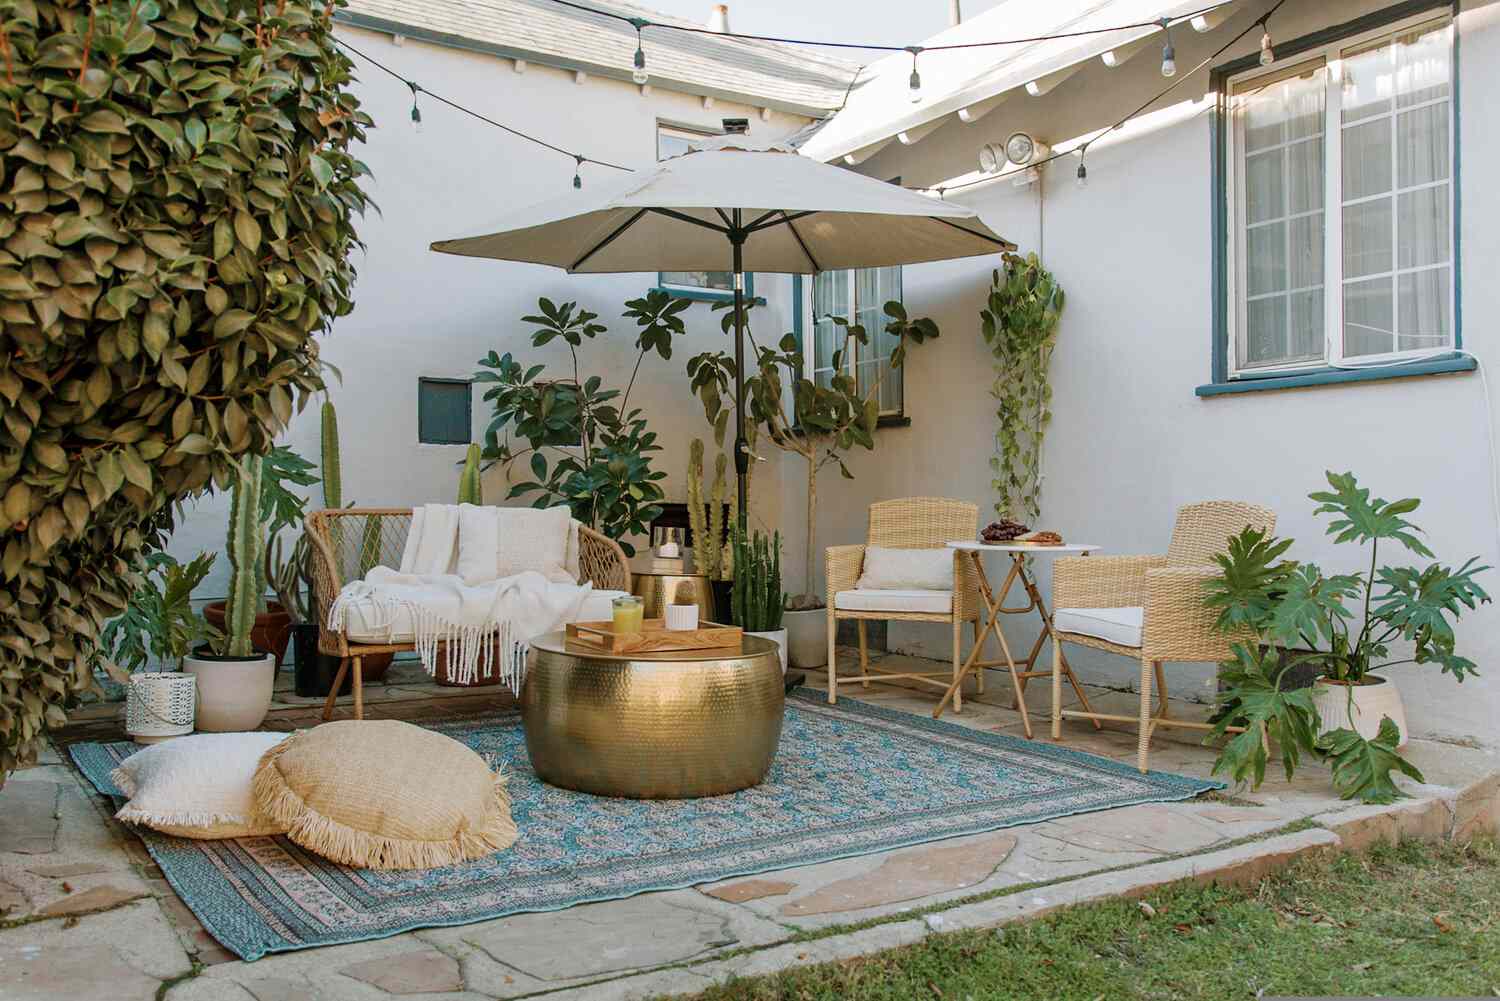 Need Shade in Your Backyard Oasis. Discover the Best 6.5